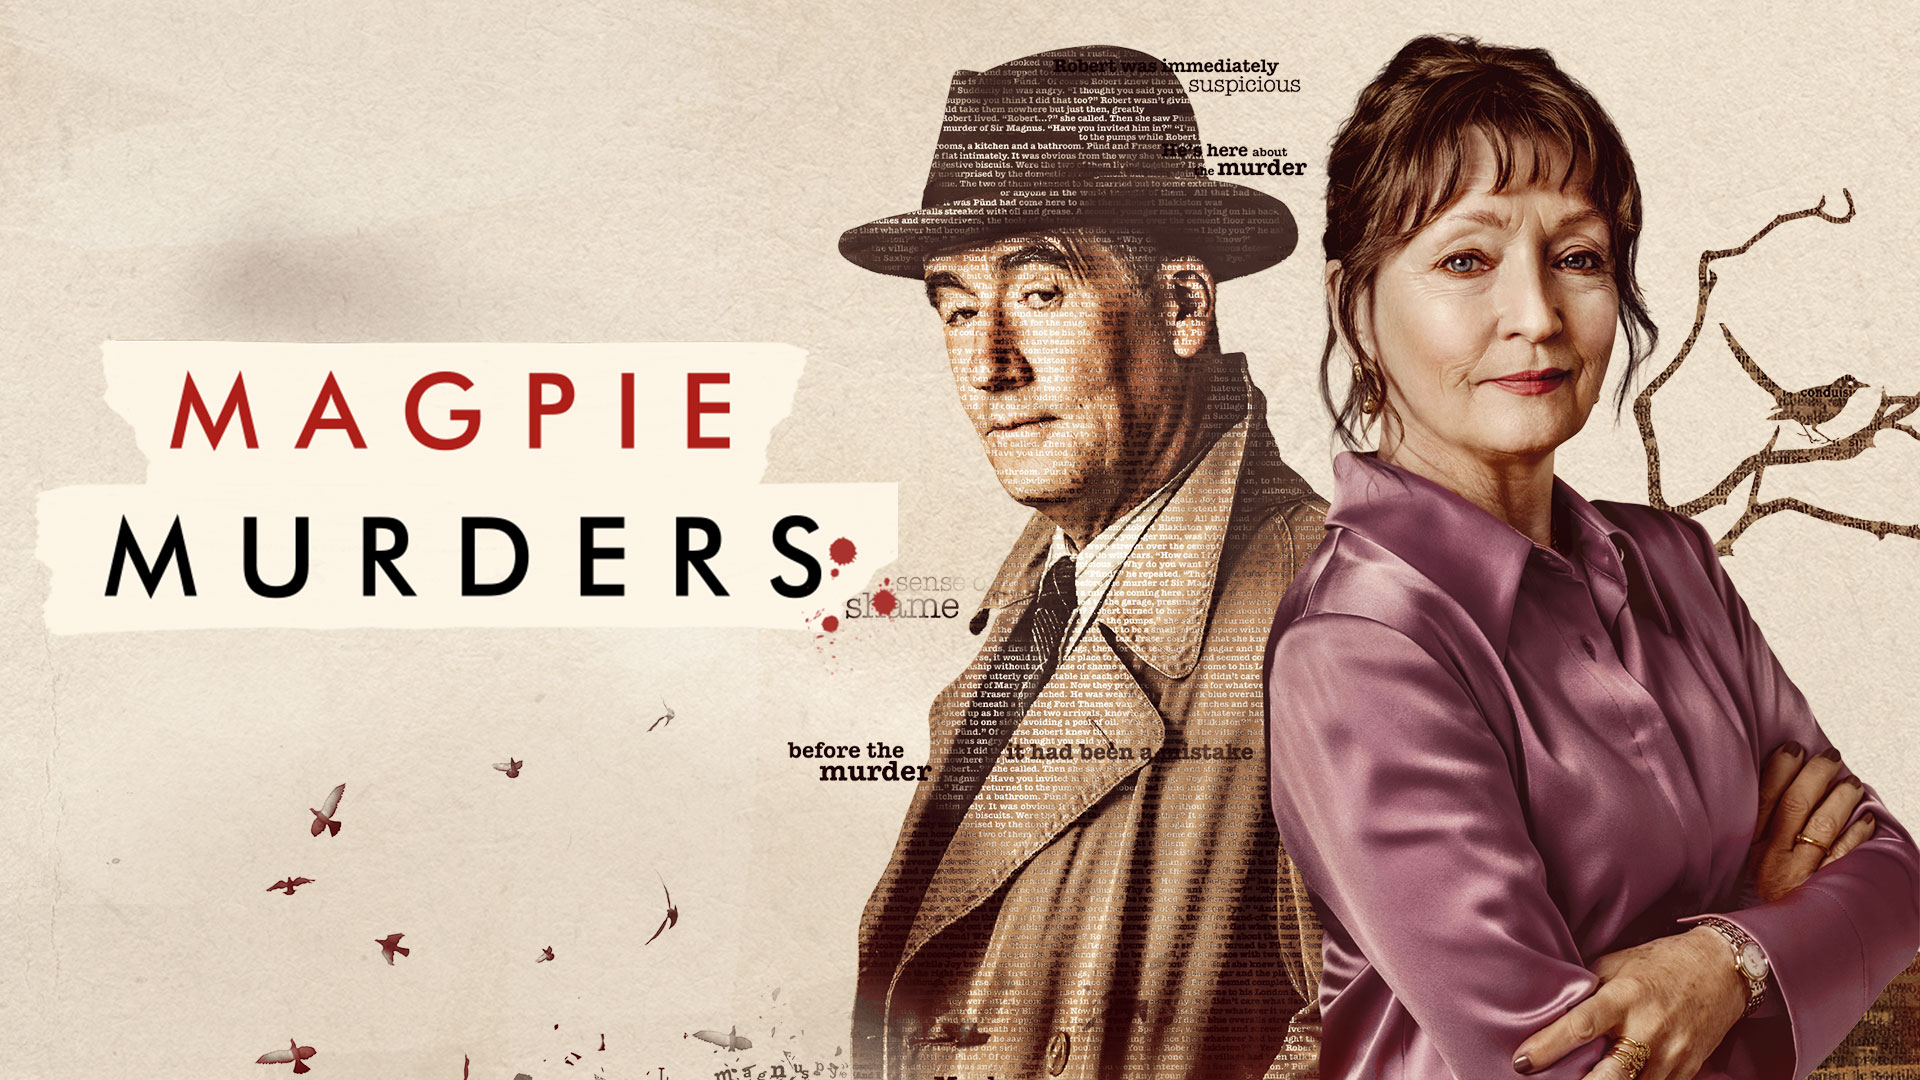 How to watch Magpie Murders on Netflix 2022 - Magpie Murders Review 2022